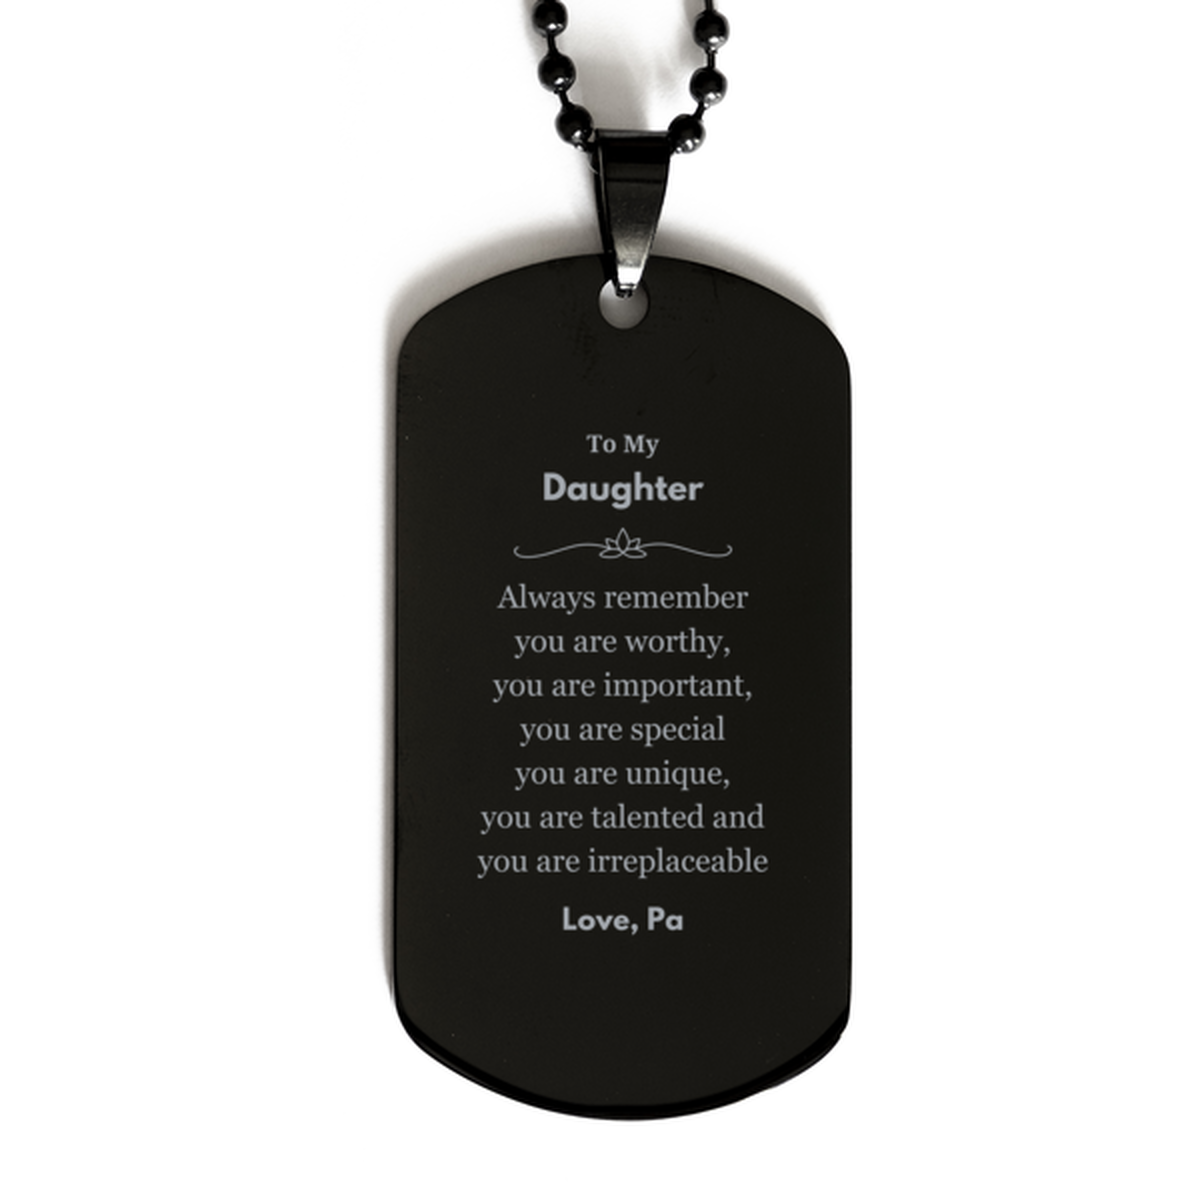 Daughter Birthday Gifts from Pa, Inspirational Black Dog Tag for Daughter Christmas Graduation Gifts for Daughter Always remember you are worthy, you are important. Love, Pa